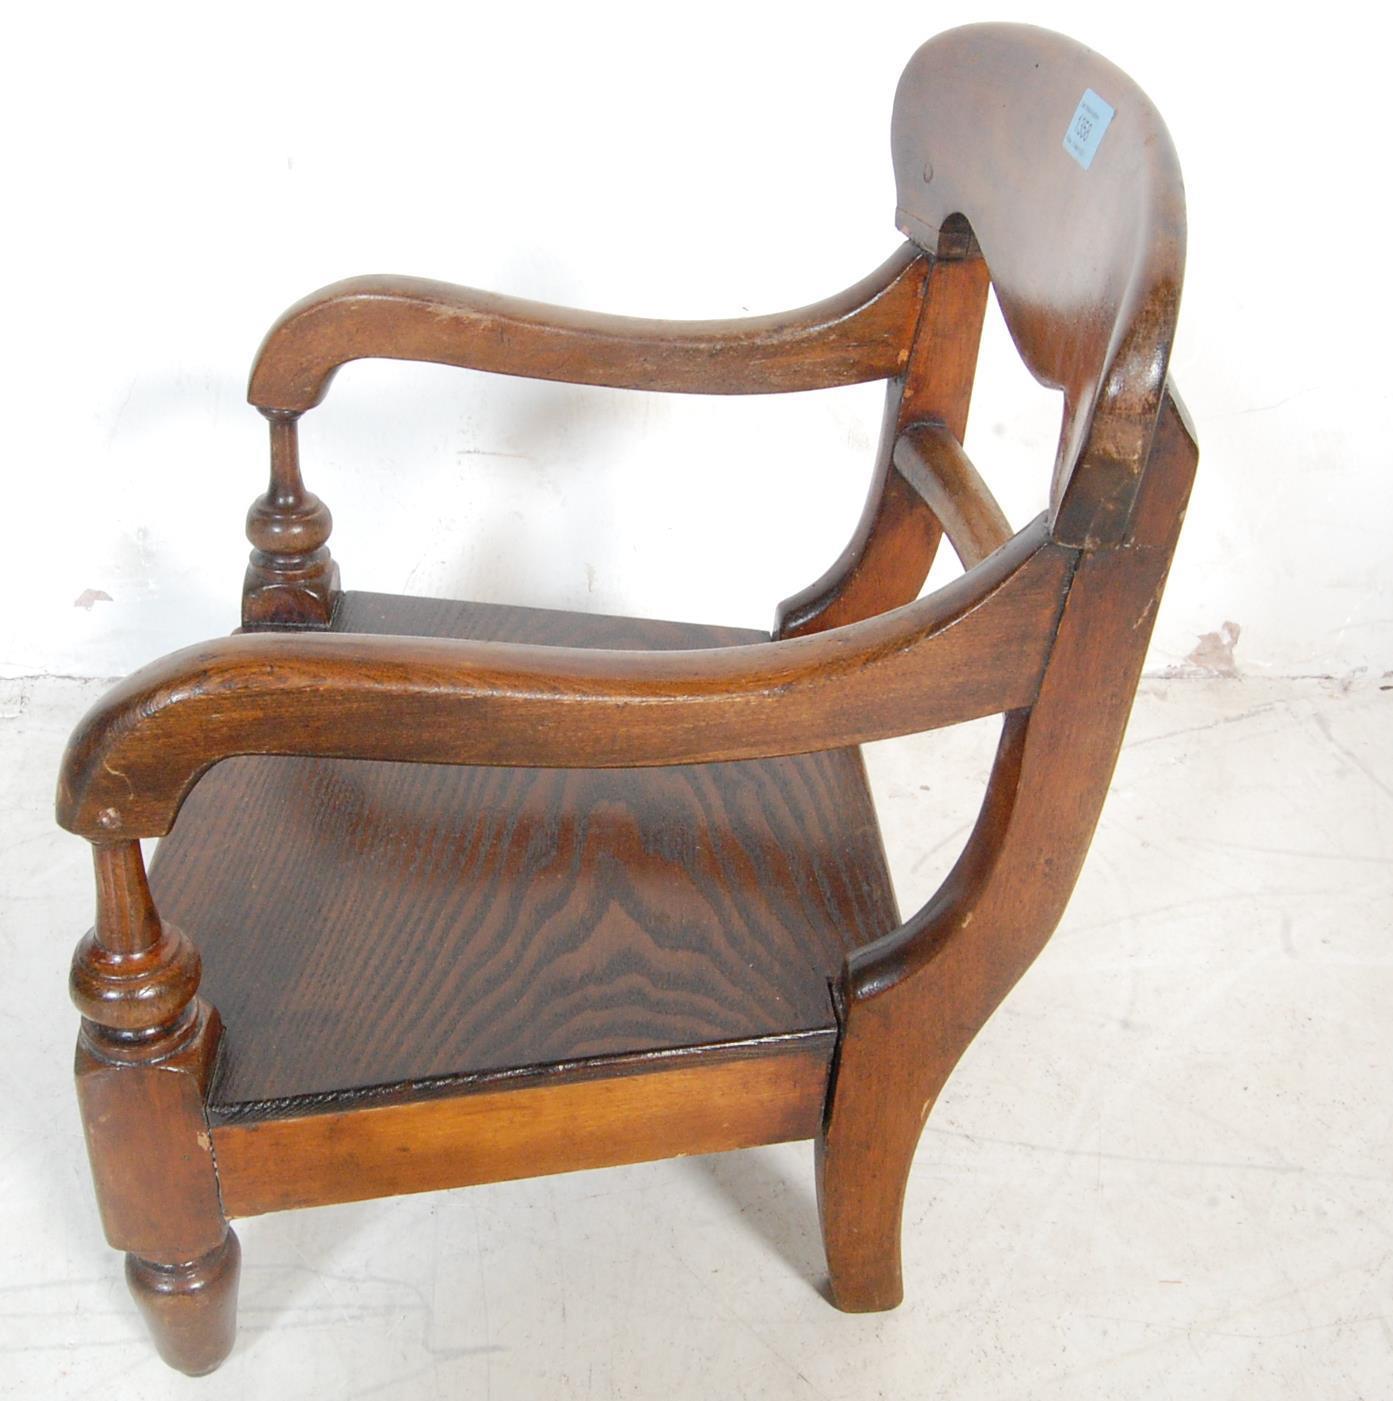 19TH CENTURY VICTORIAN MAHOGANY CHILDRENS CHAIR - Image 4 of 6